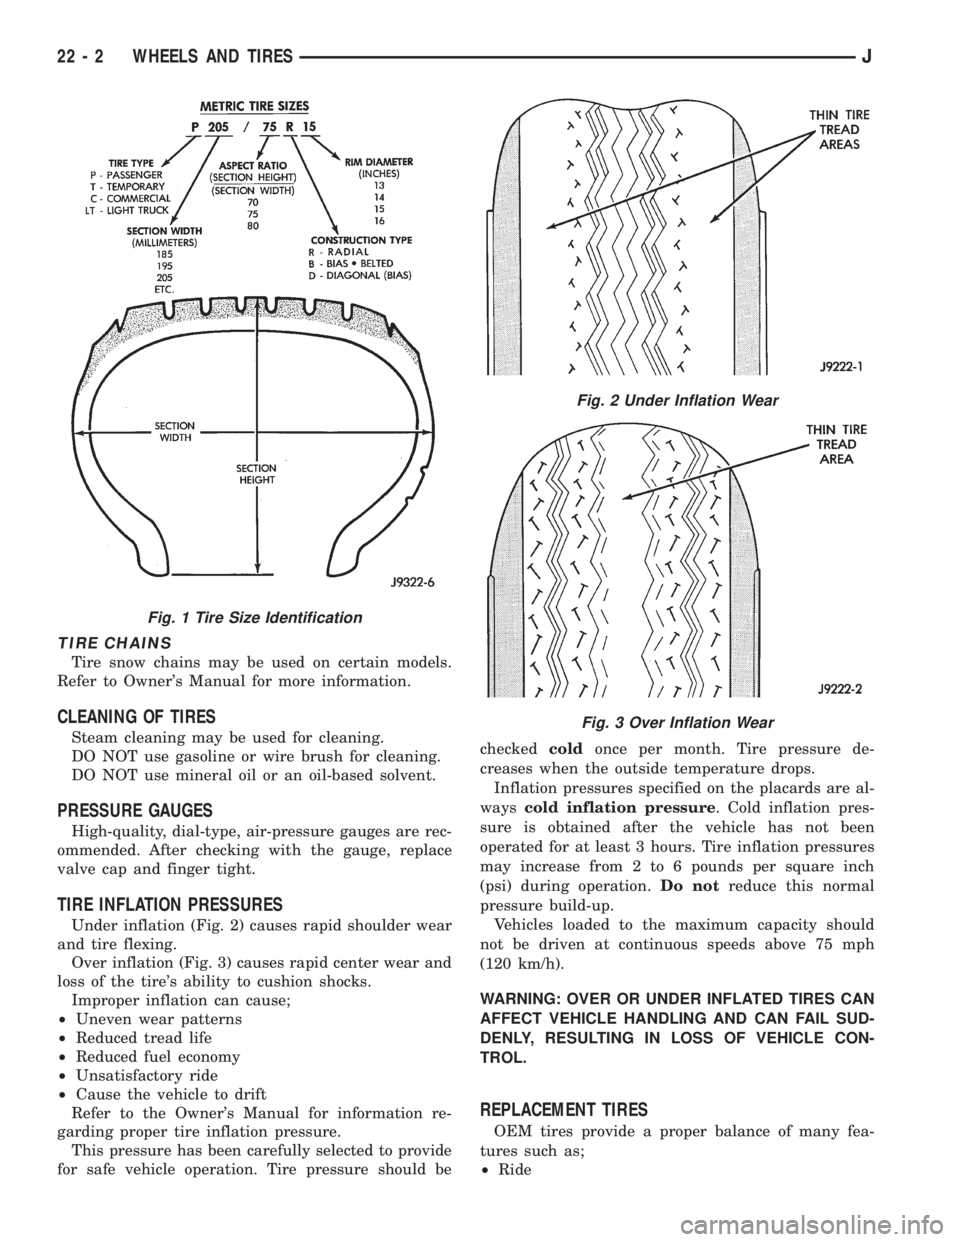 JEEP XJ 1995  Service And Repair Manual TIRE CHAINS
Tire snow chains may be used on certain models.
Refer to Owners Manual for more information.
CLEANING OF TIRES
Steam cleaning may be used for cleaning.
DO NOT use gasoline or wire brush f